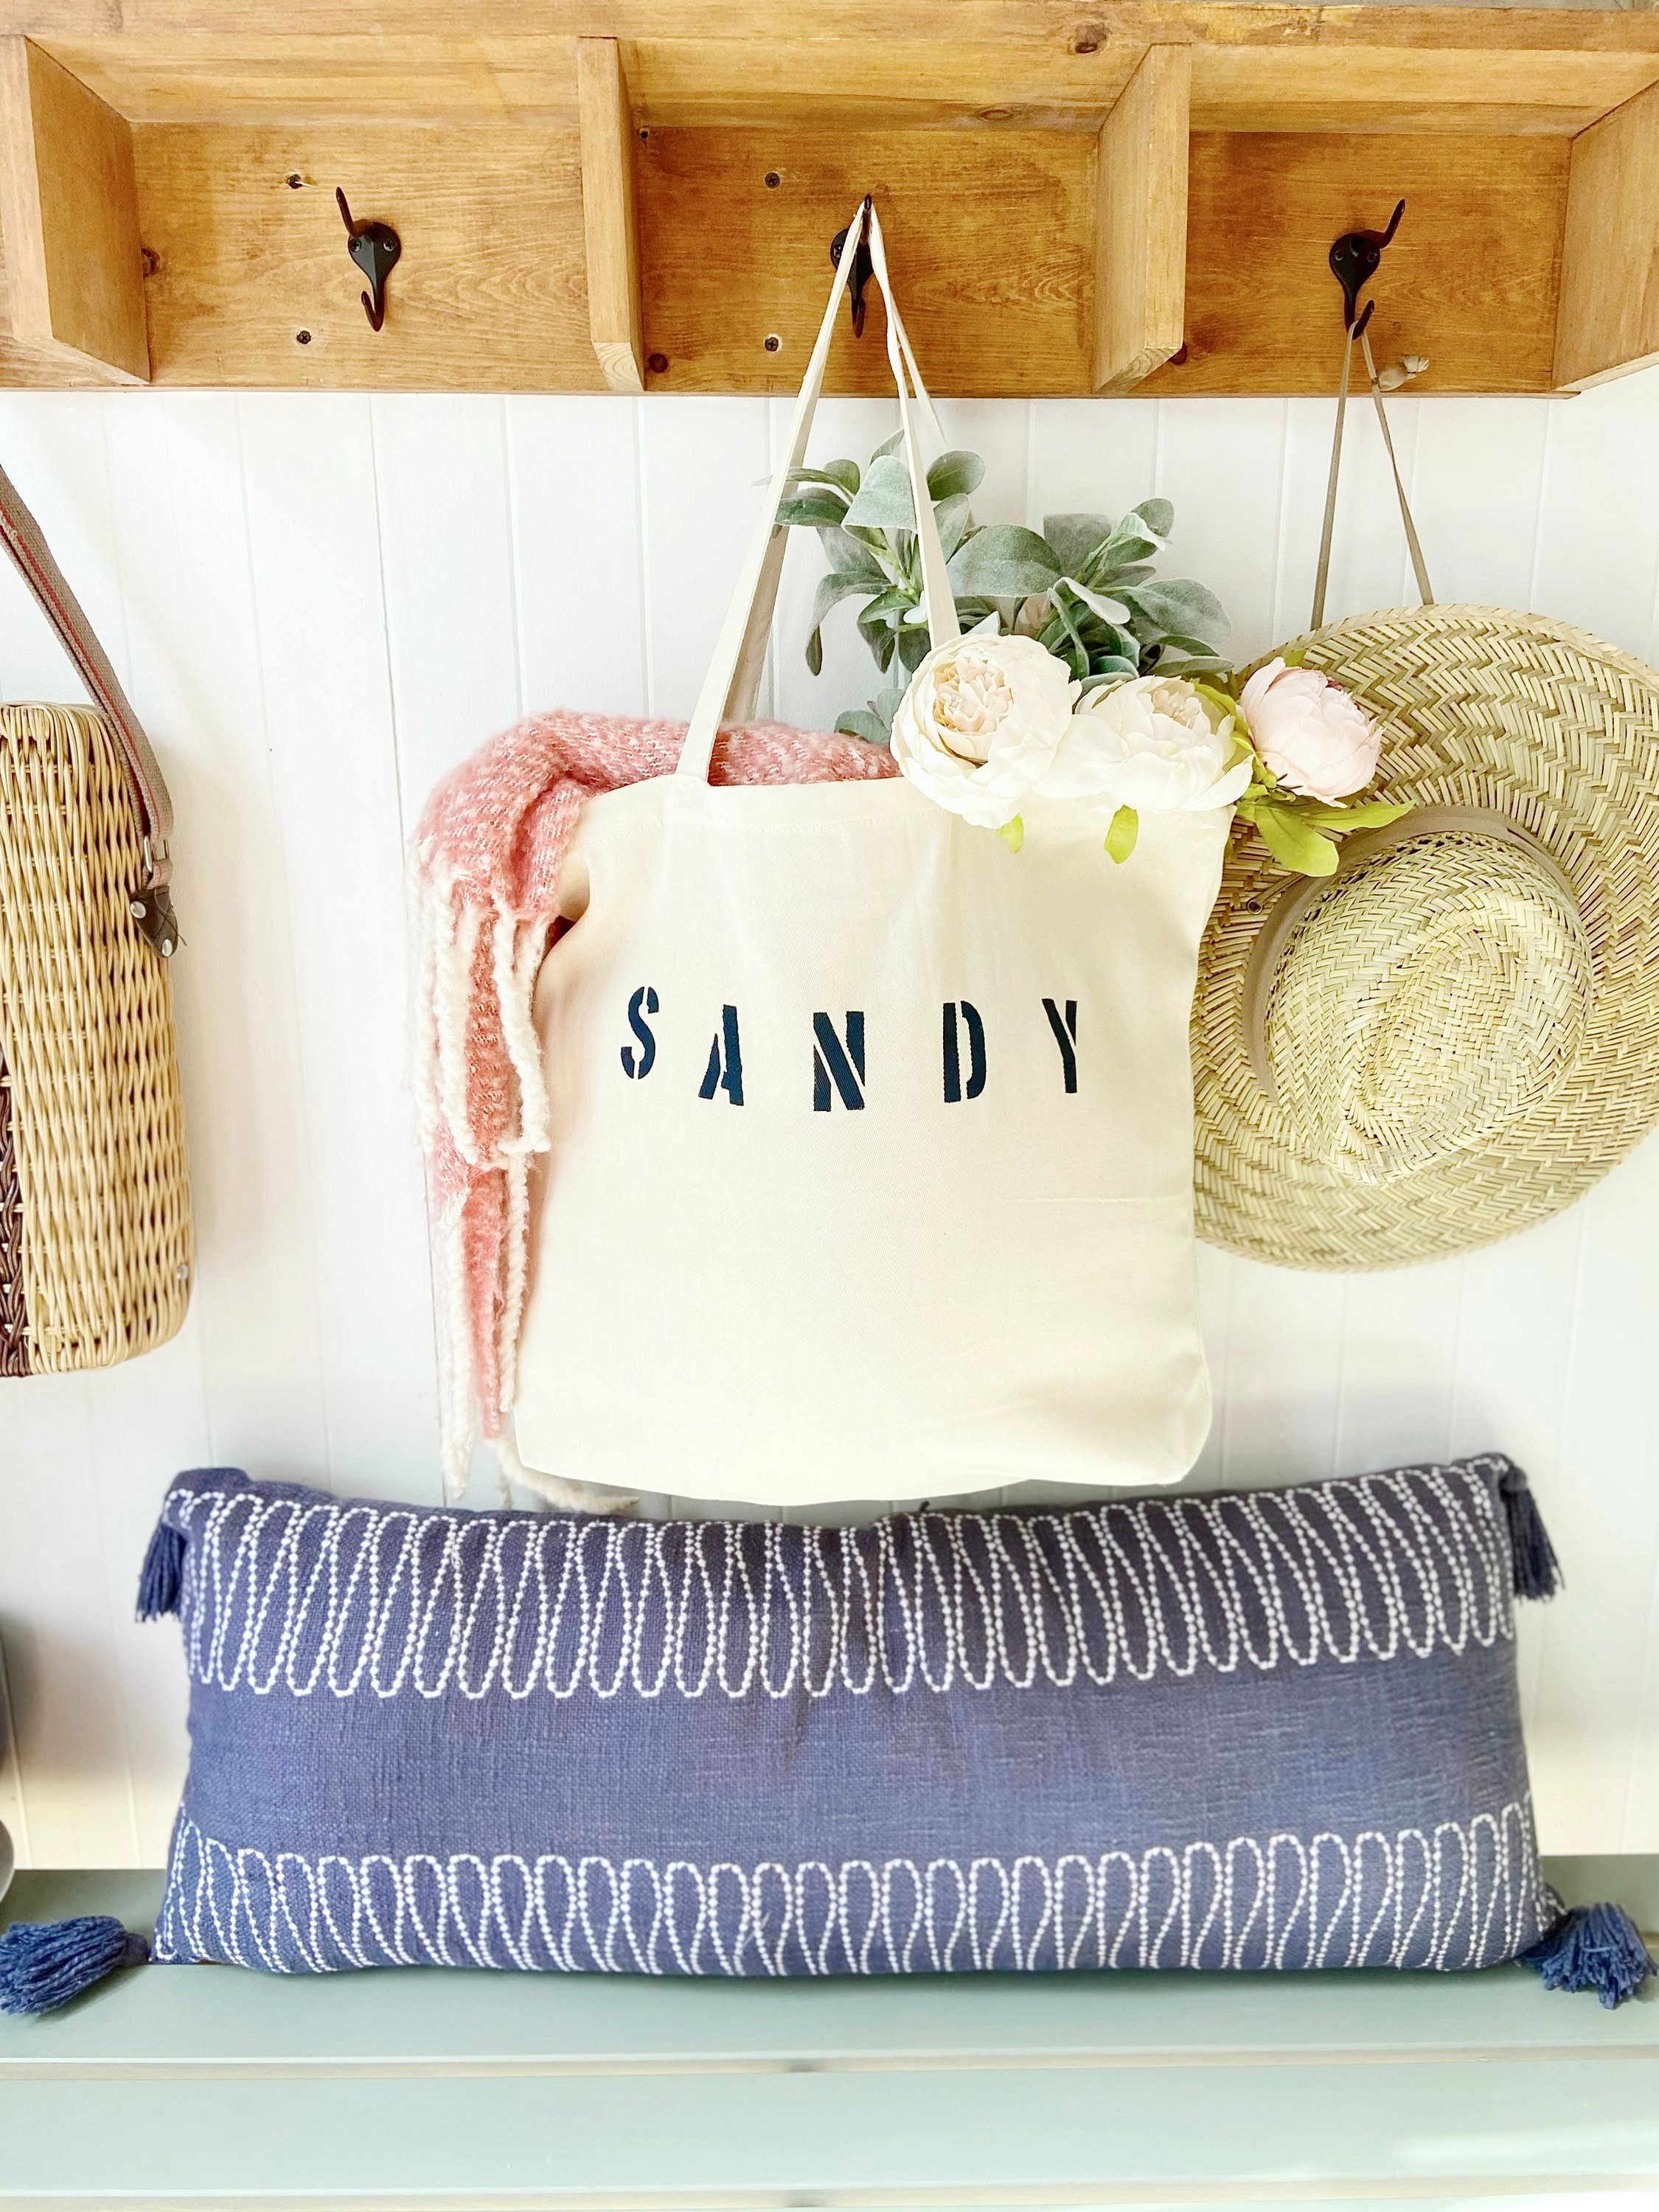 SANDY Over Sized Canvas Tote Bag Ladies Trip Tote Bag Gift 